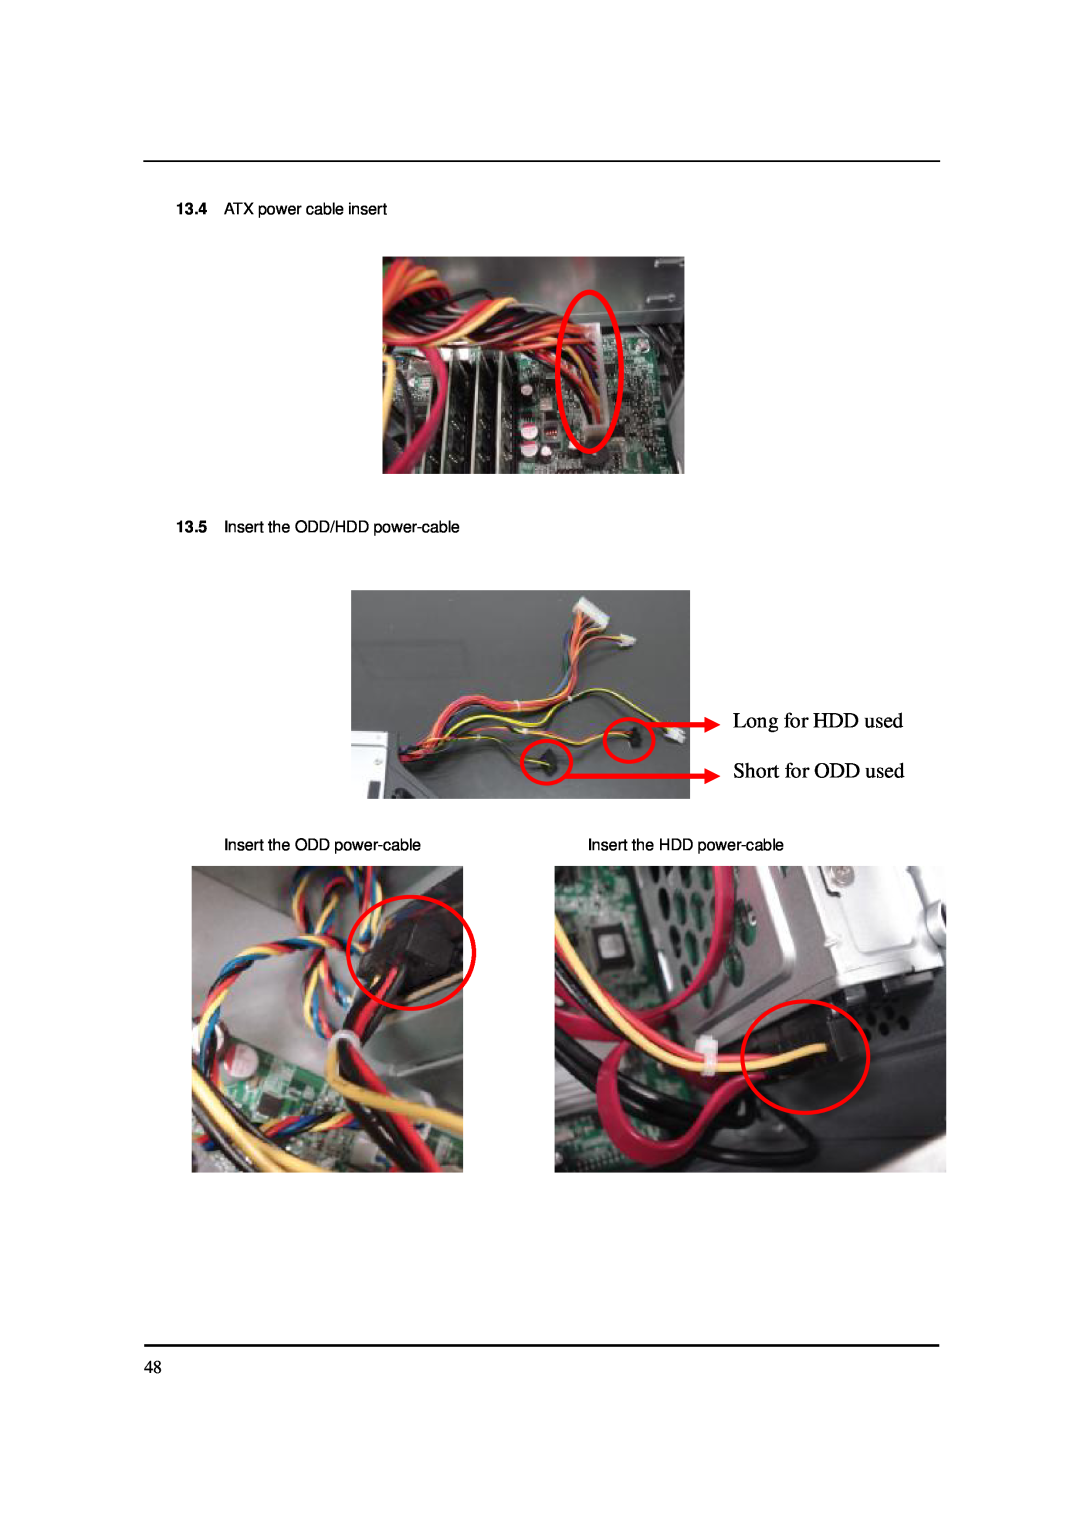 Acer S3811 manual Long for HDD used Short for ODD used, ATX power cable insert 13.5 Insert the ODD/HDD power-cable 